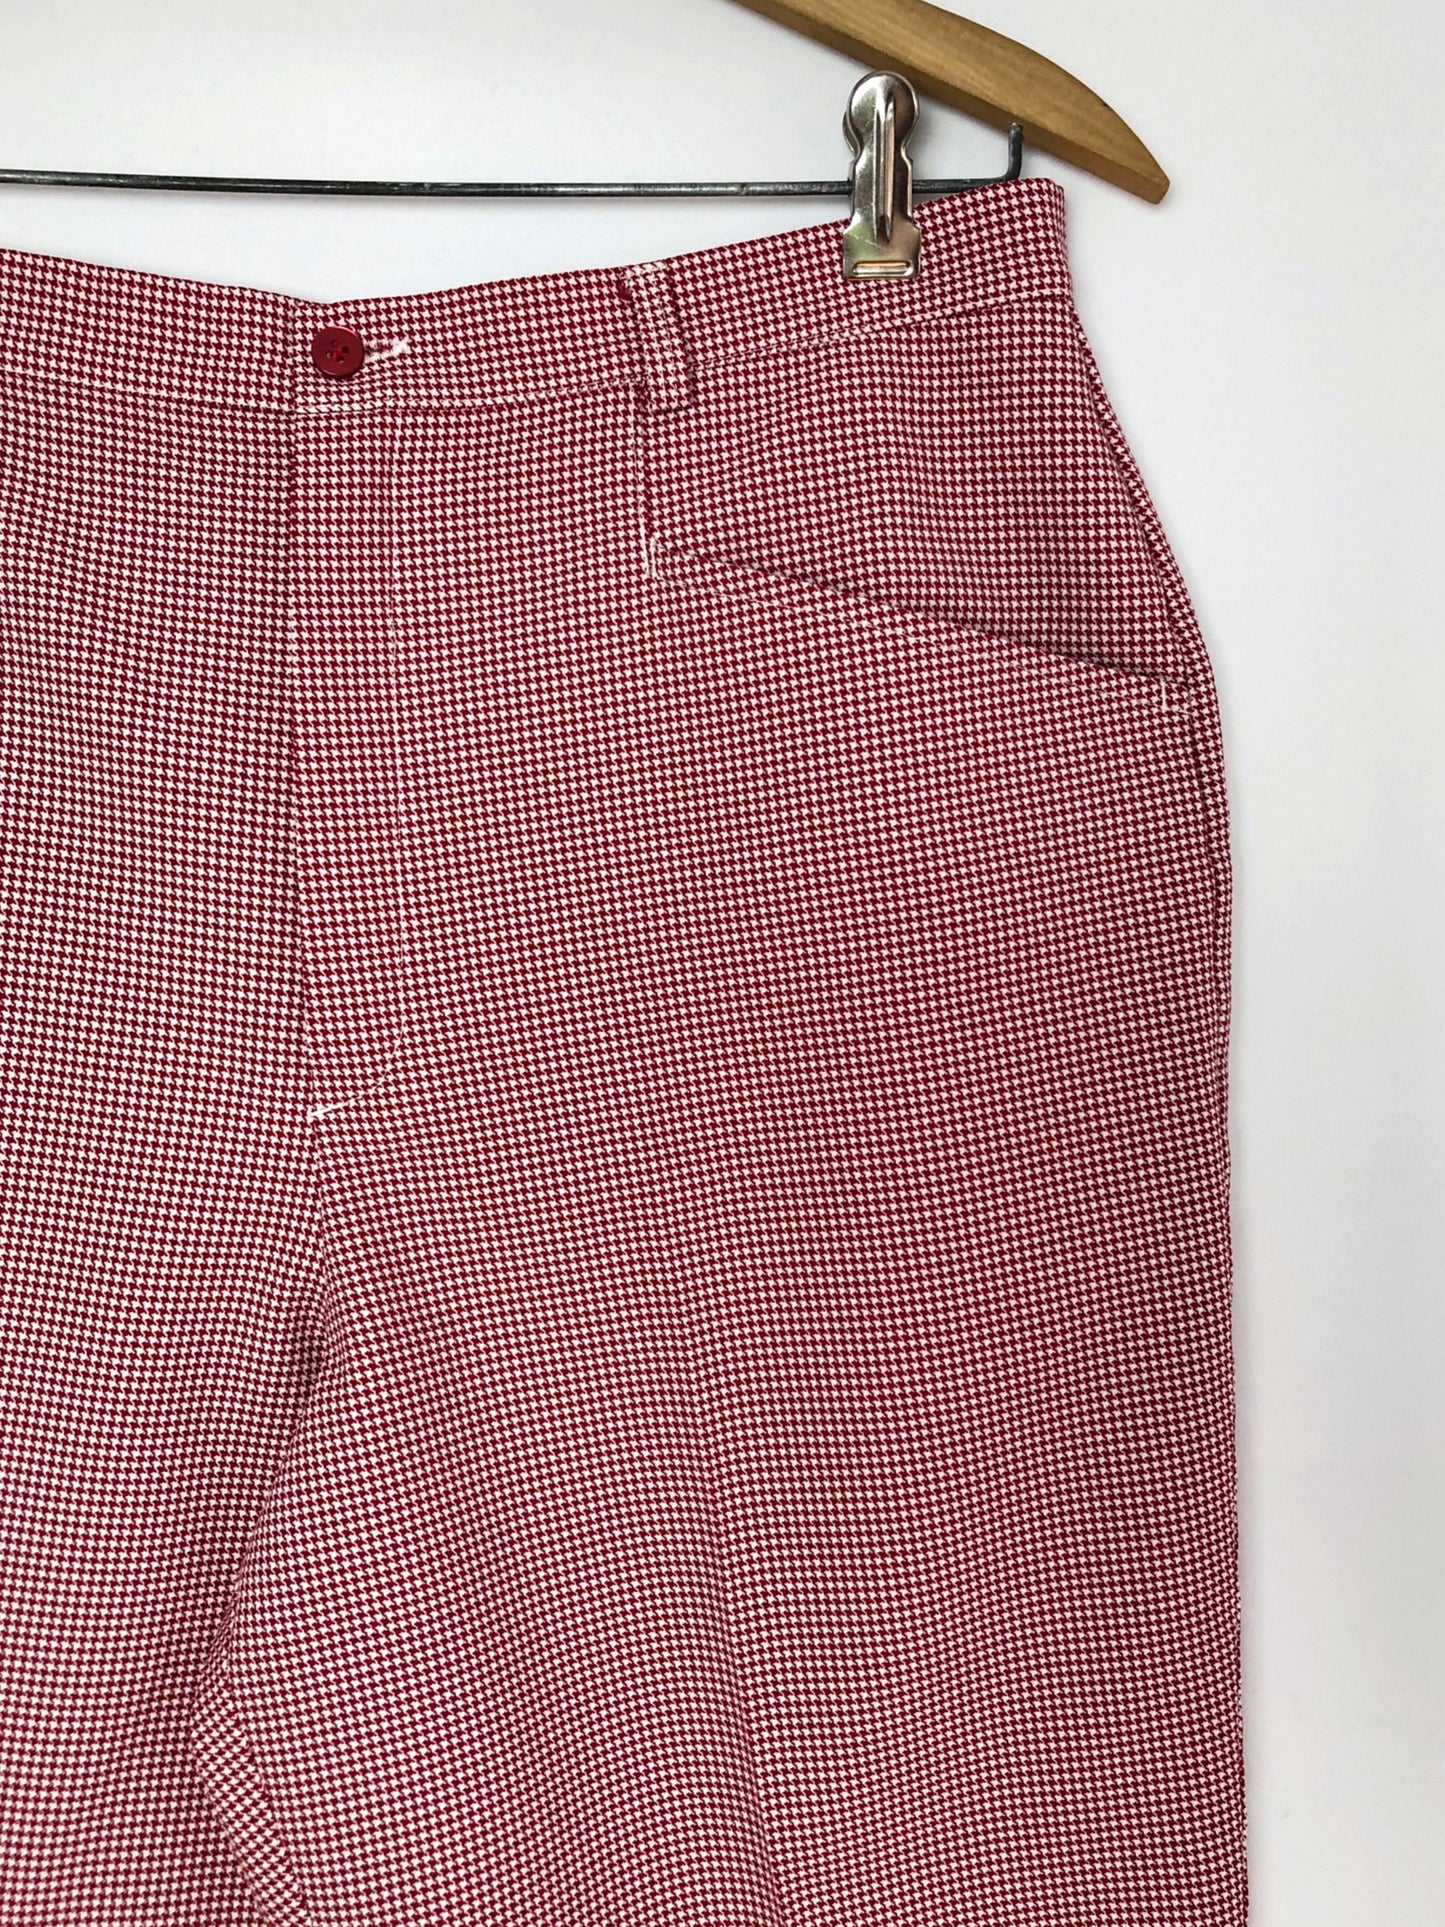 Wms Vintage 60’s Red & White HOUNDSTOOTH Pleated Menswear Trousers Size 12